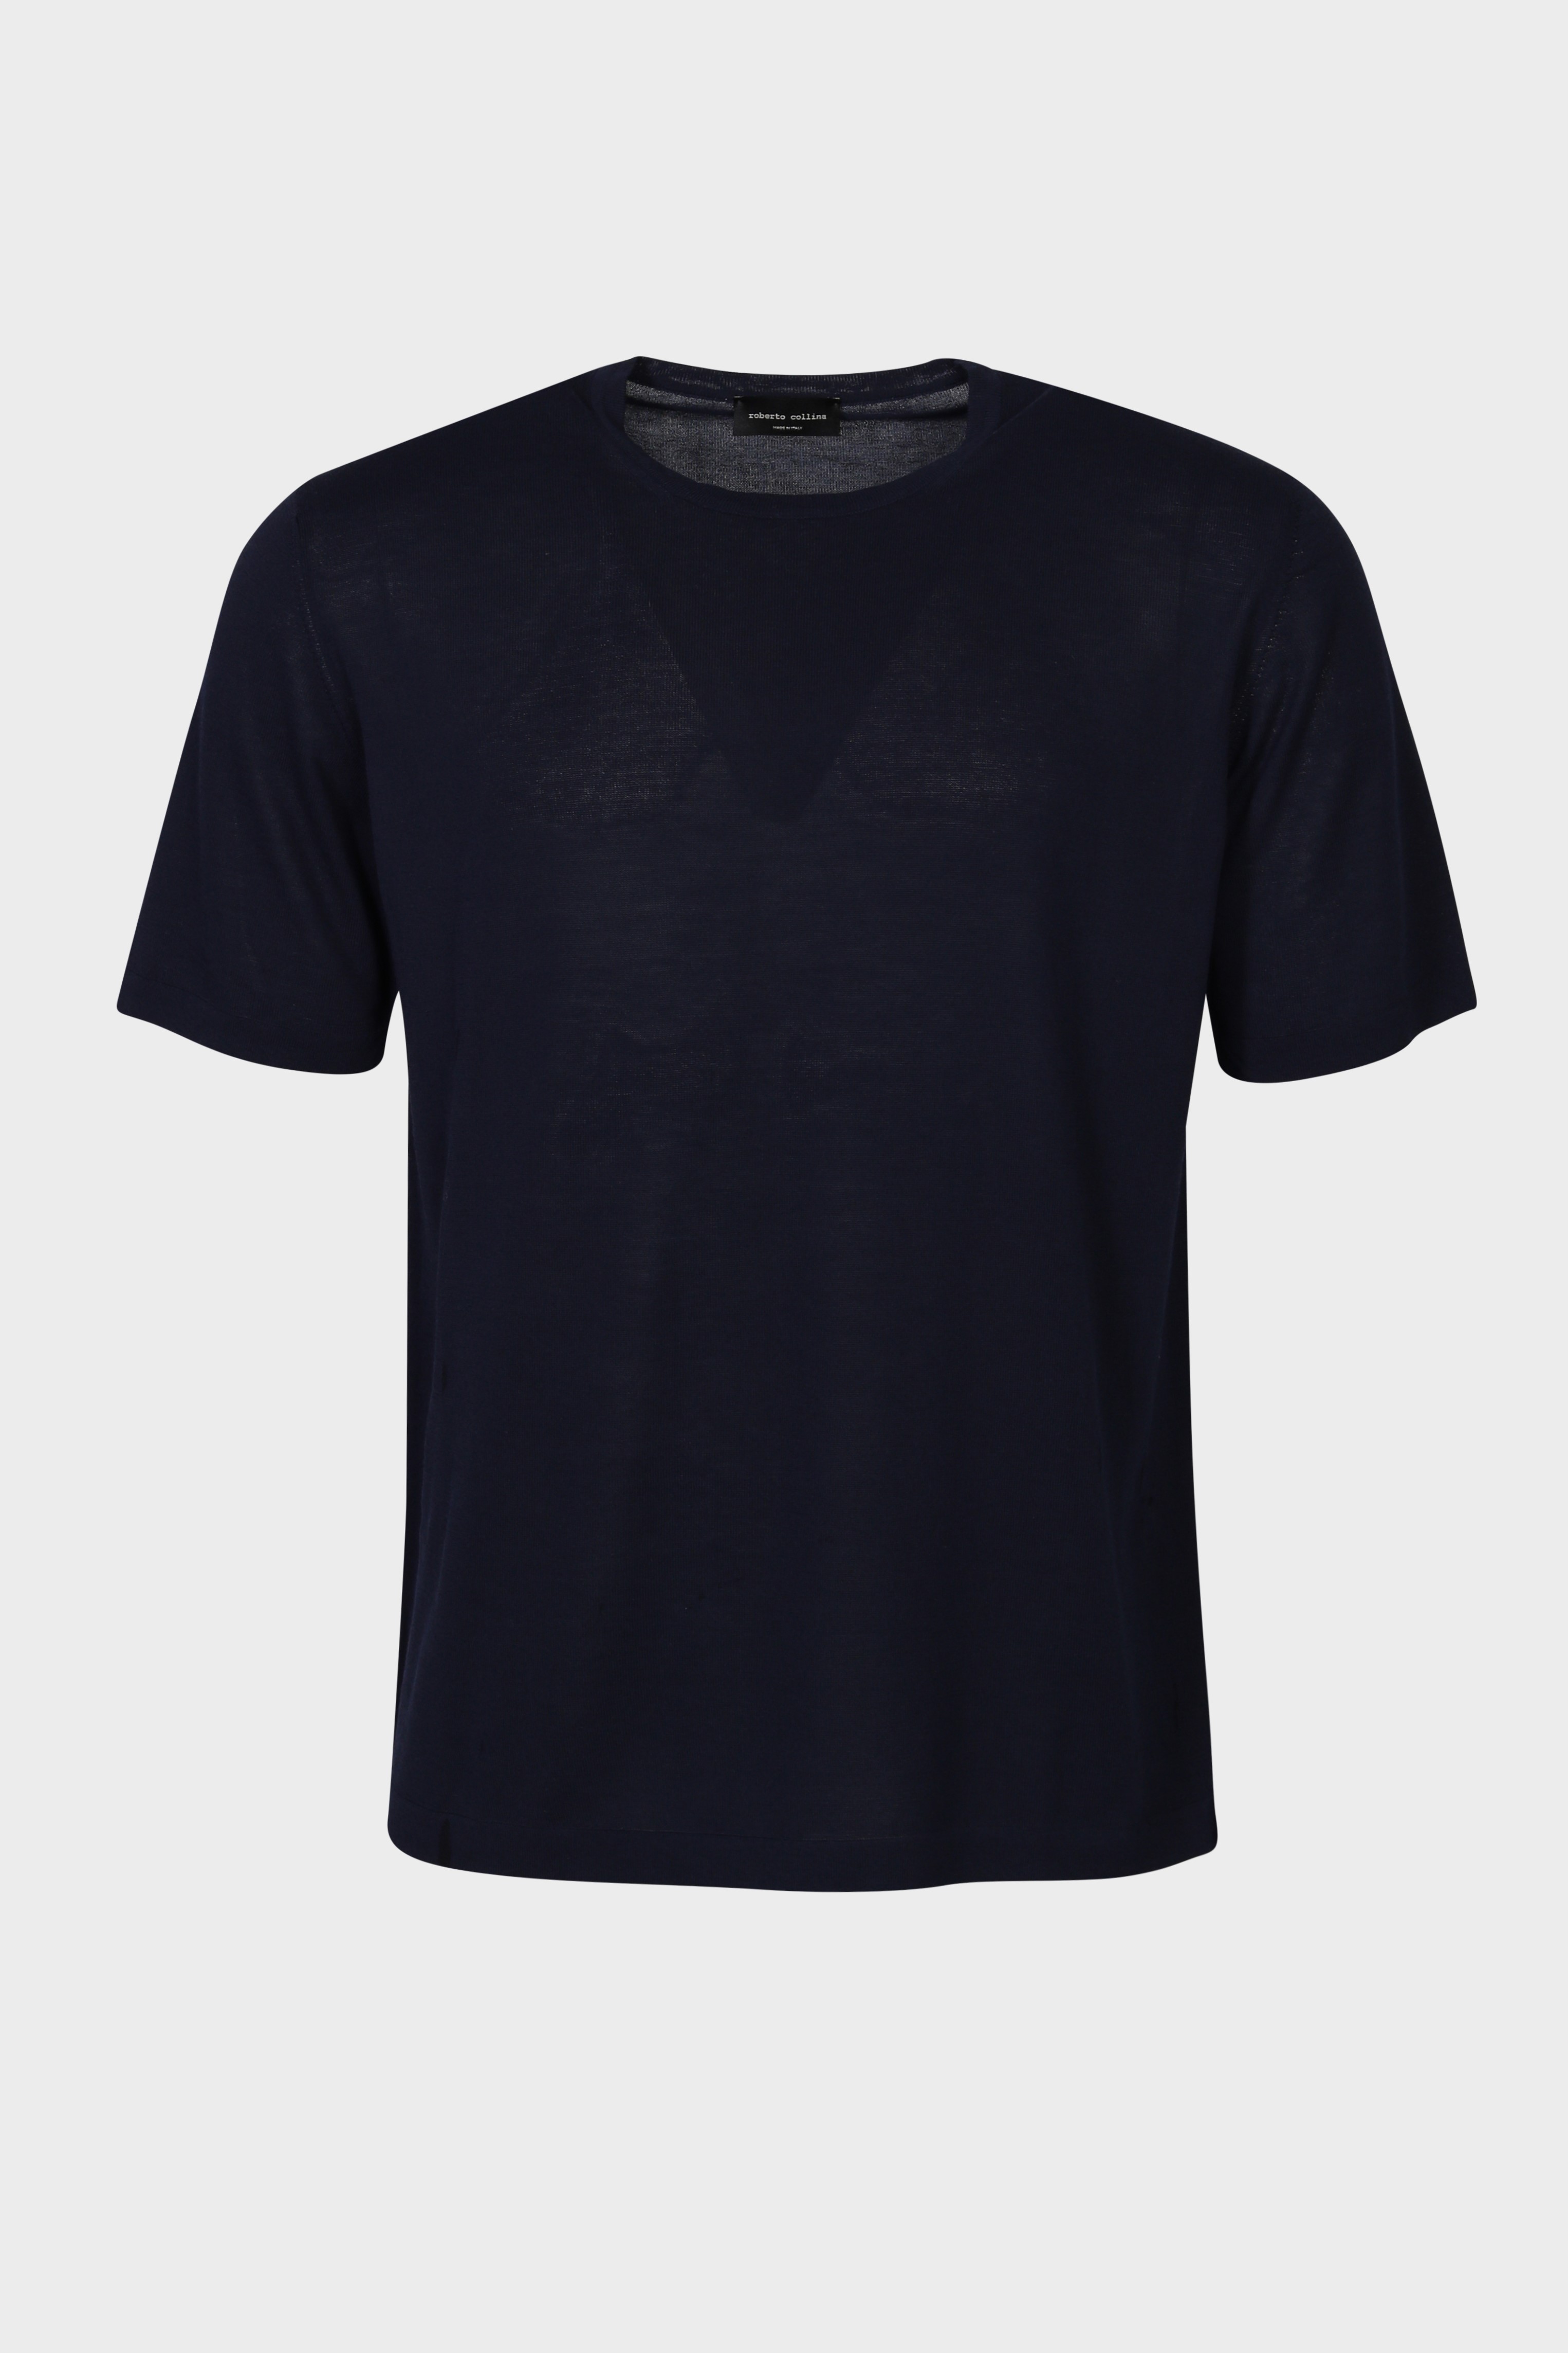 ROBERTO COLLINA Cotton Knit T-Shirt in Navy 48